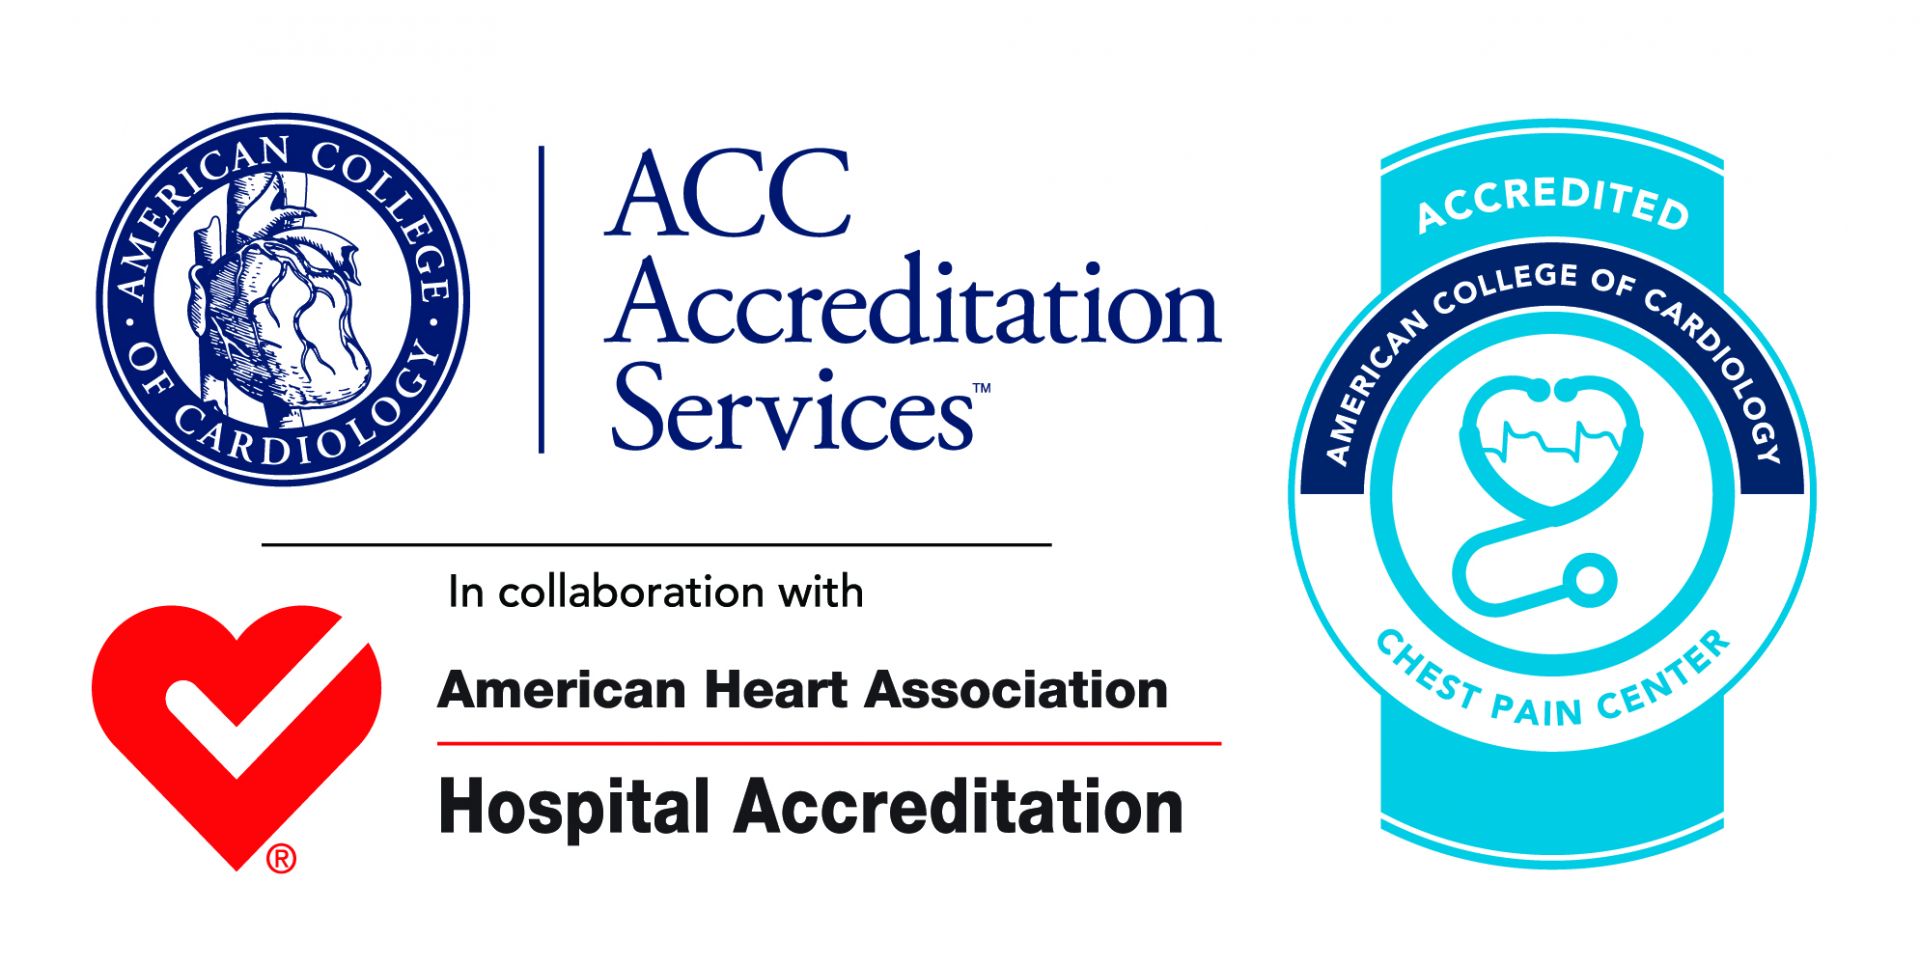 Multiple accreditation logos from the ACC Accreditation Services including the American Heart Association and American College of Cardiology.